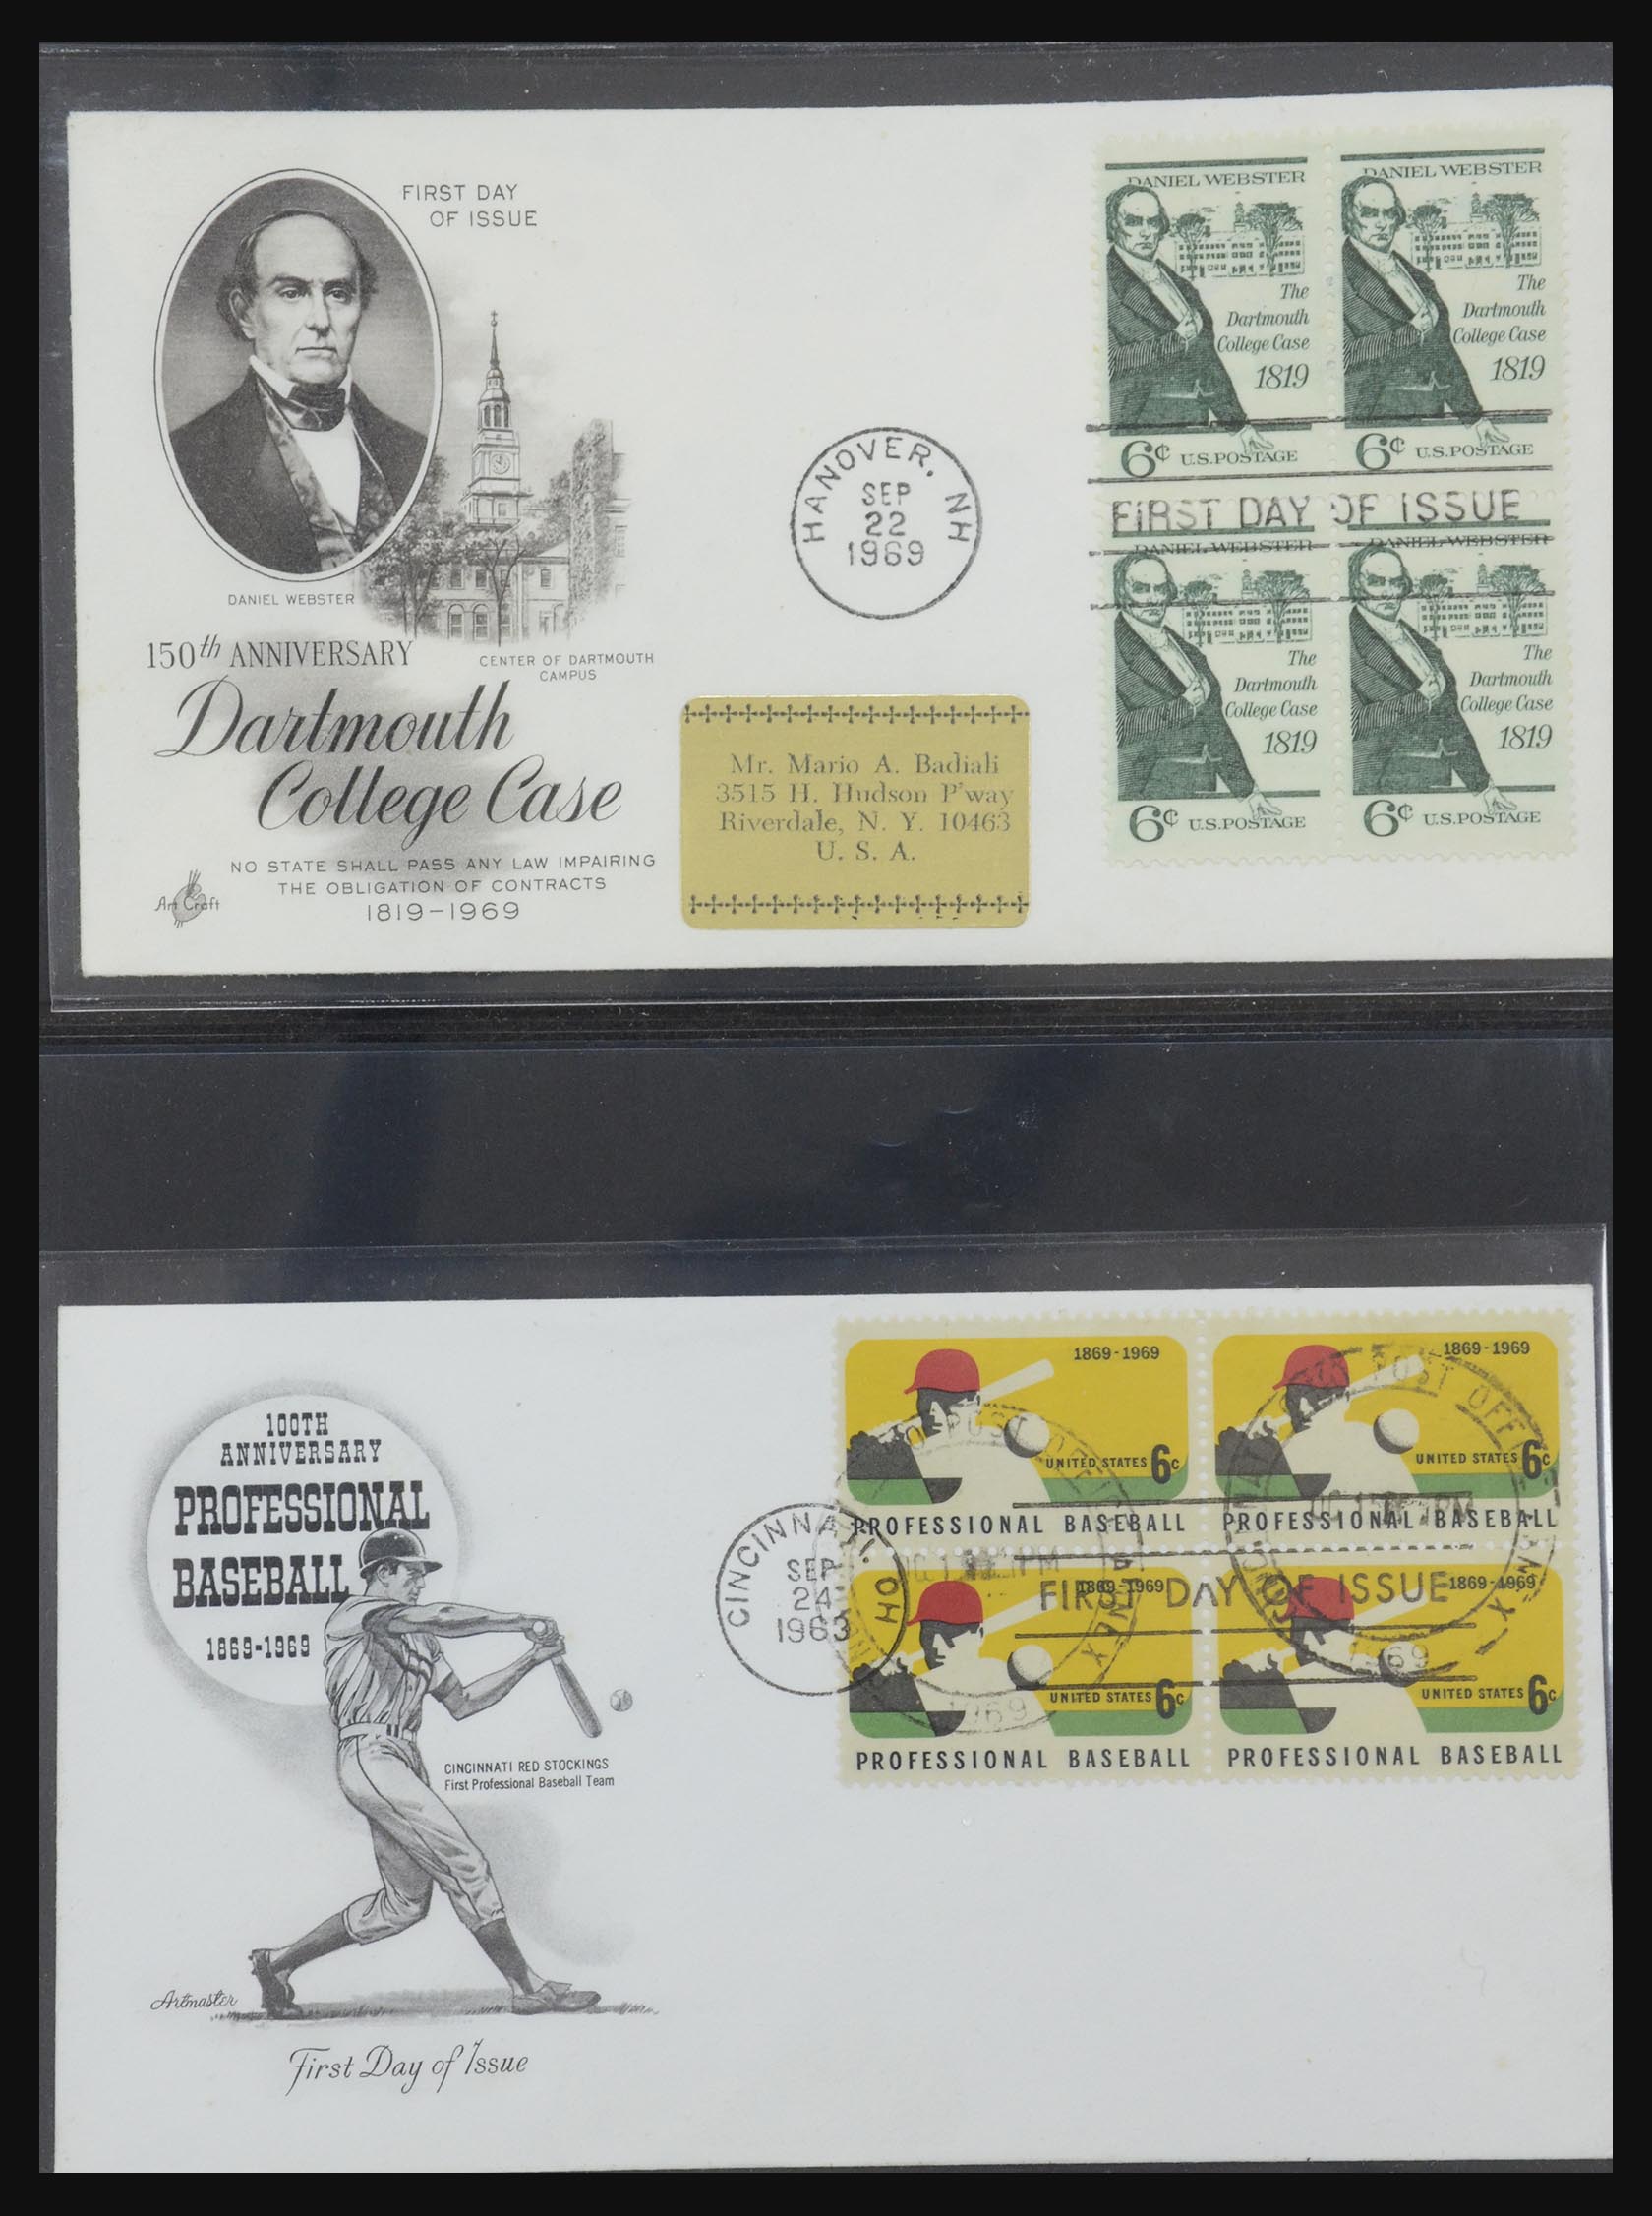 31913 0089 - 31913 USA fdc-collectie 1945-1990.